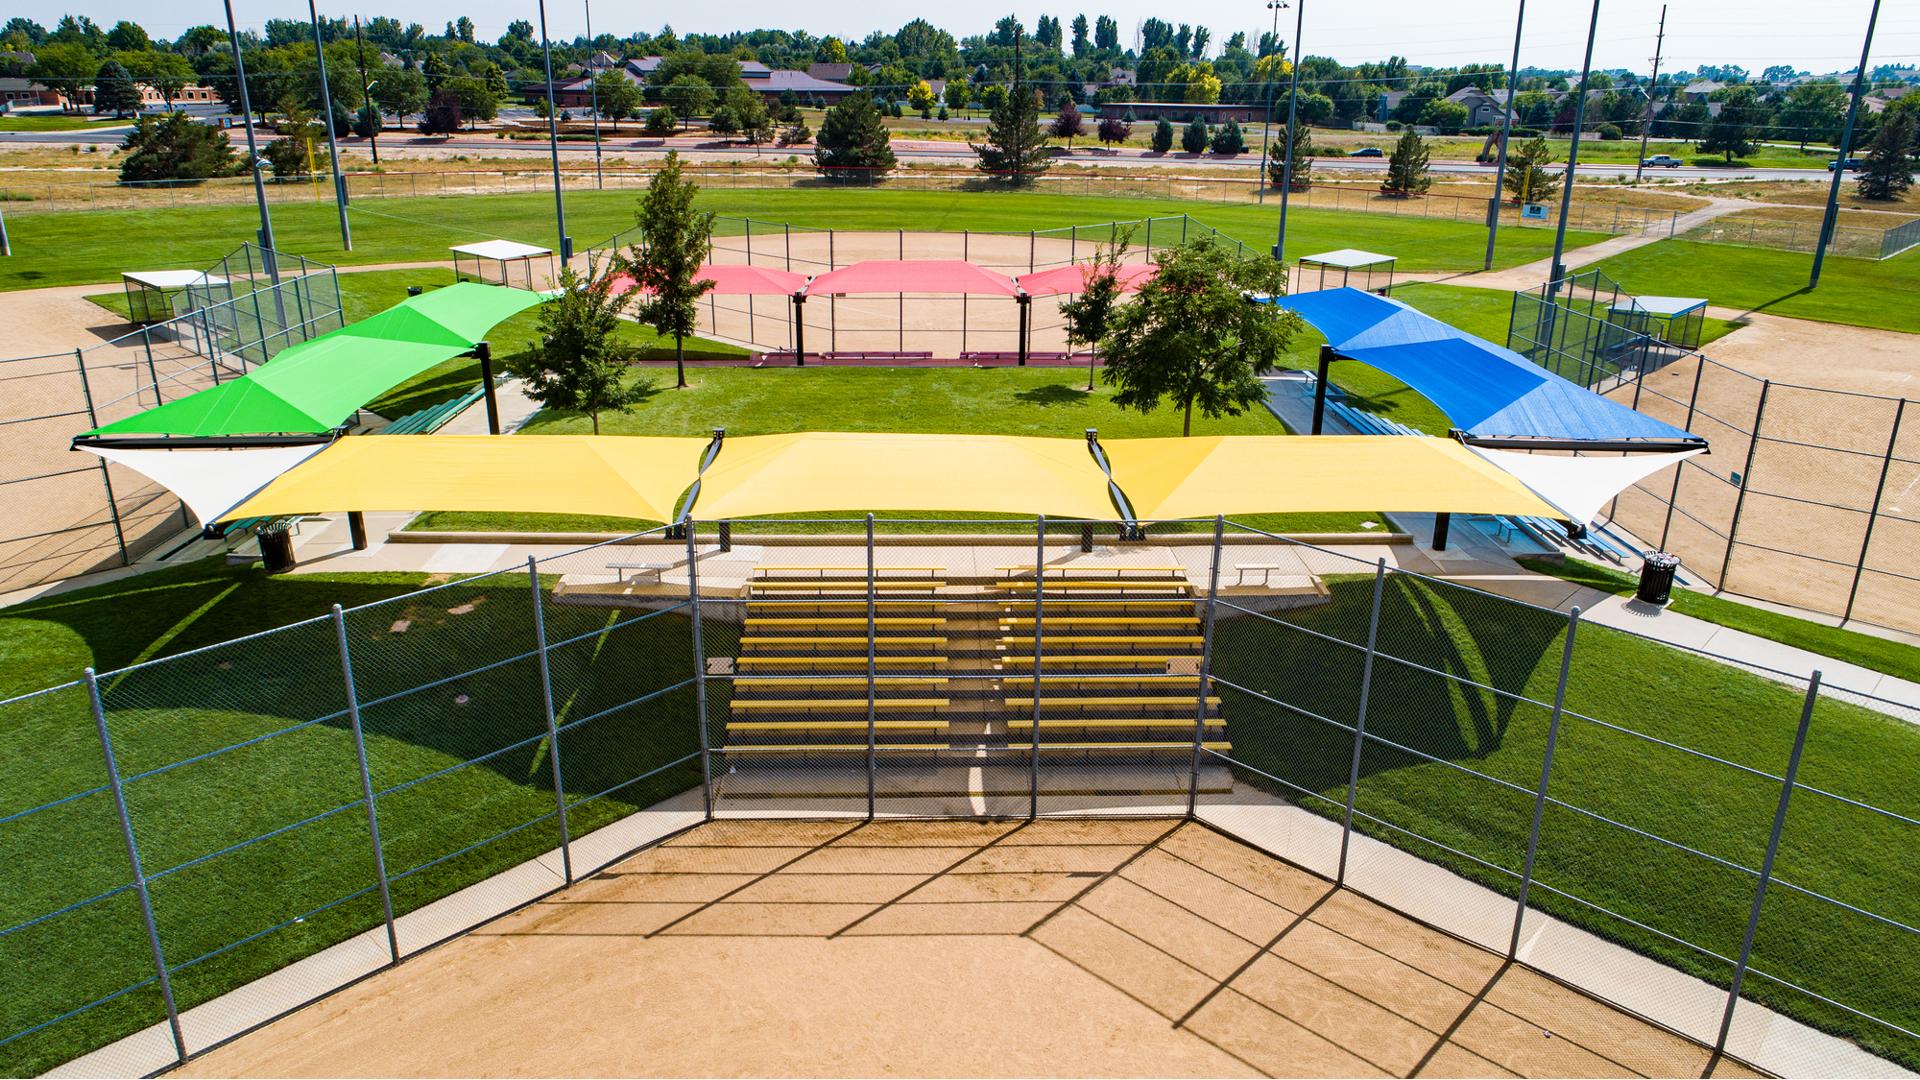 Greeley Youth Sports Complex - Baseball-Themed Playground